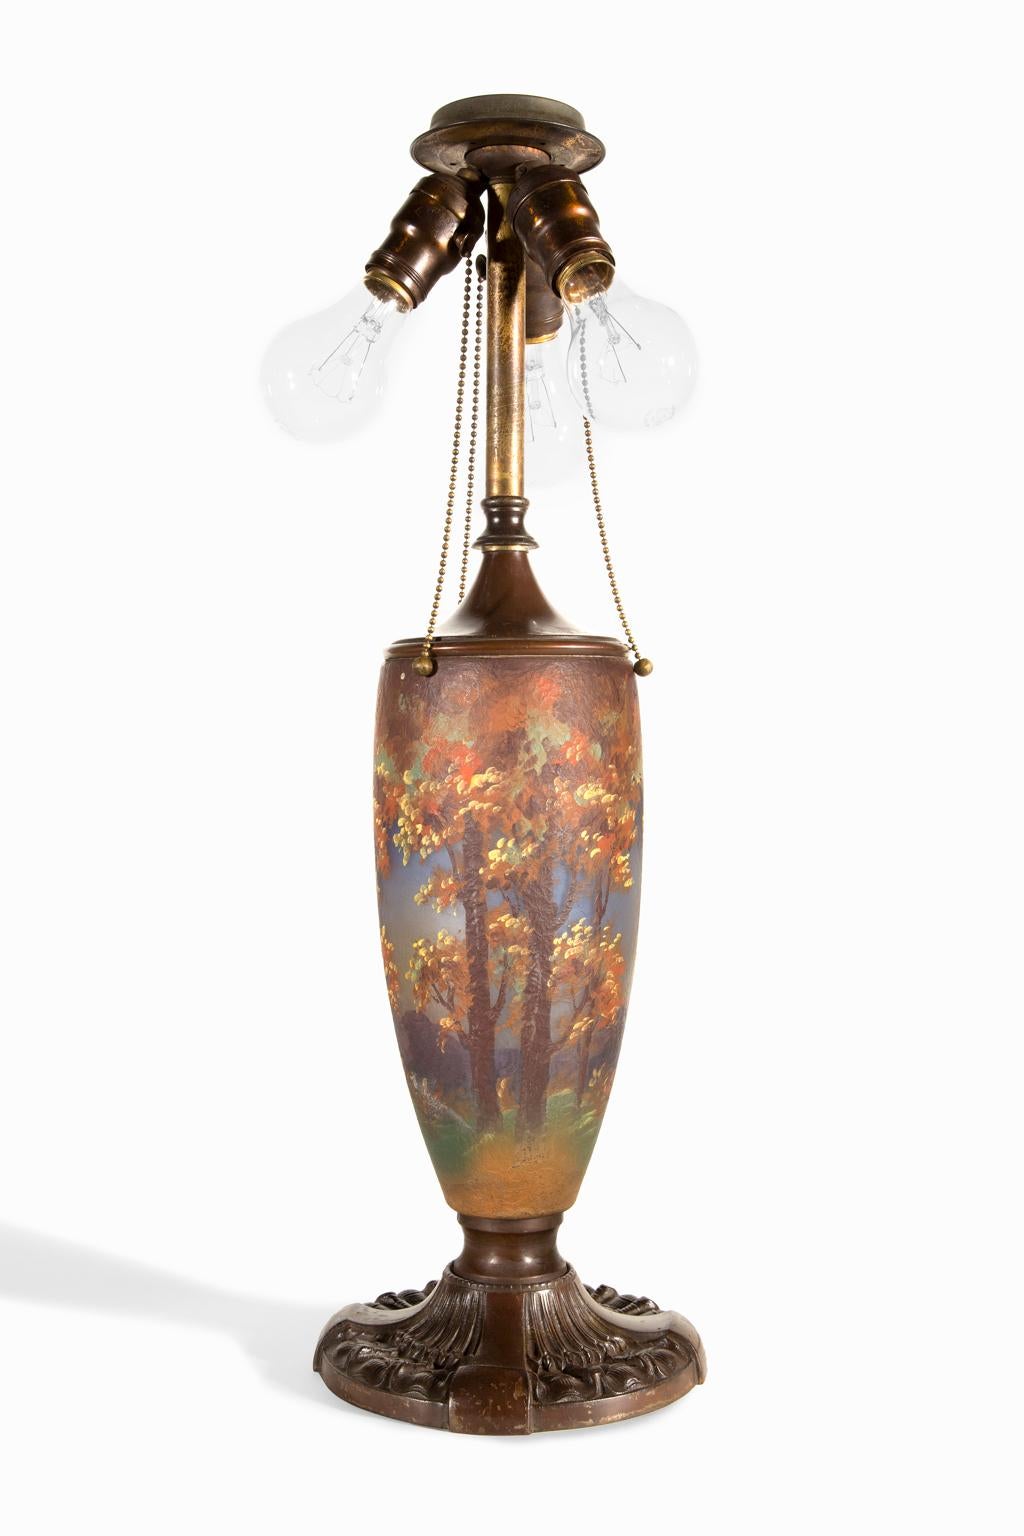 Art Nouveau Pittsburgh Glass Company Nicolas Kopp Reverse Glass Painting Shade & Lamp  For Sale